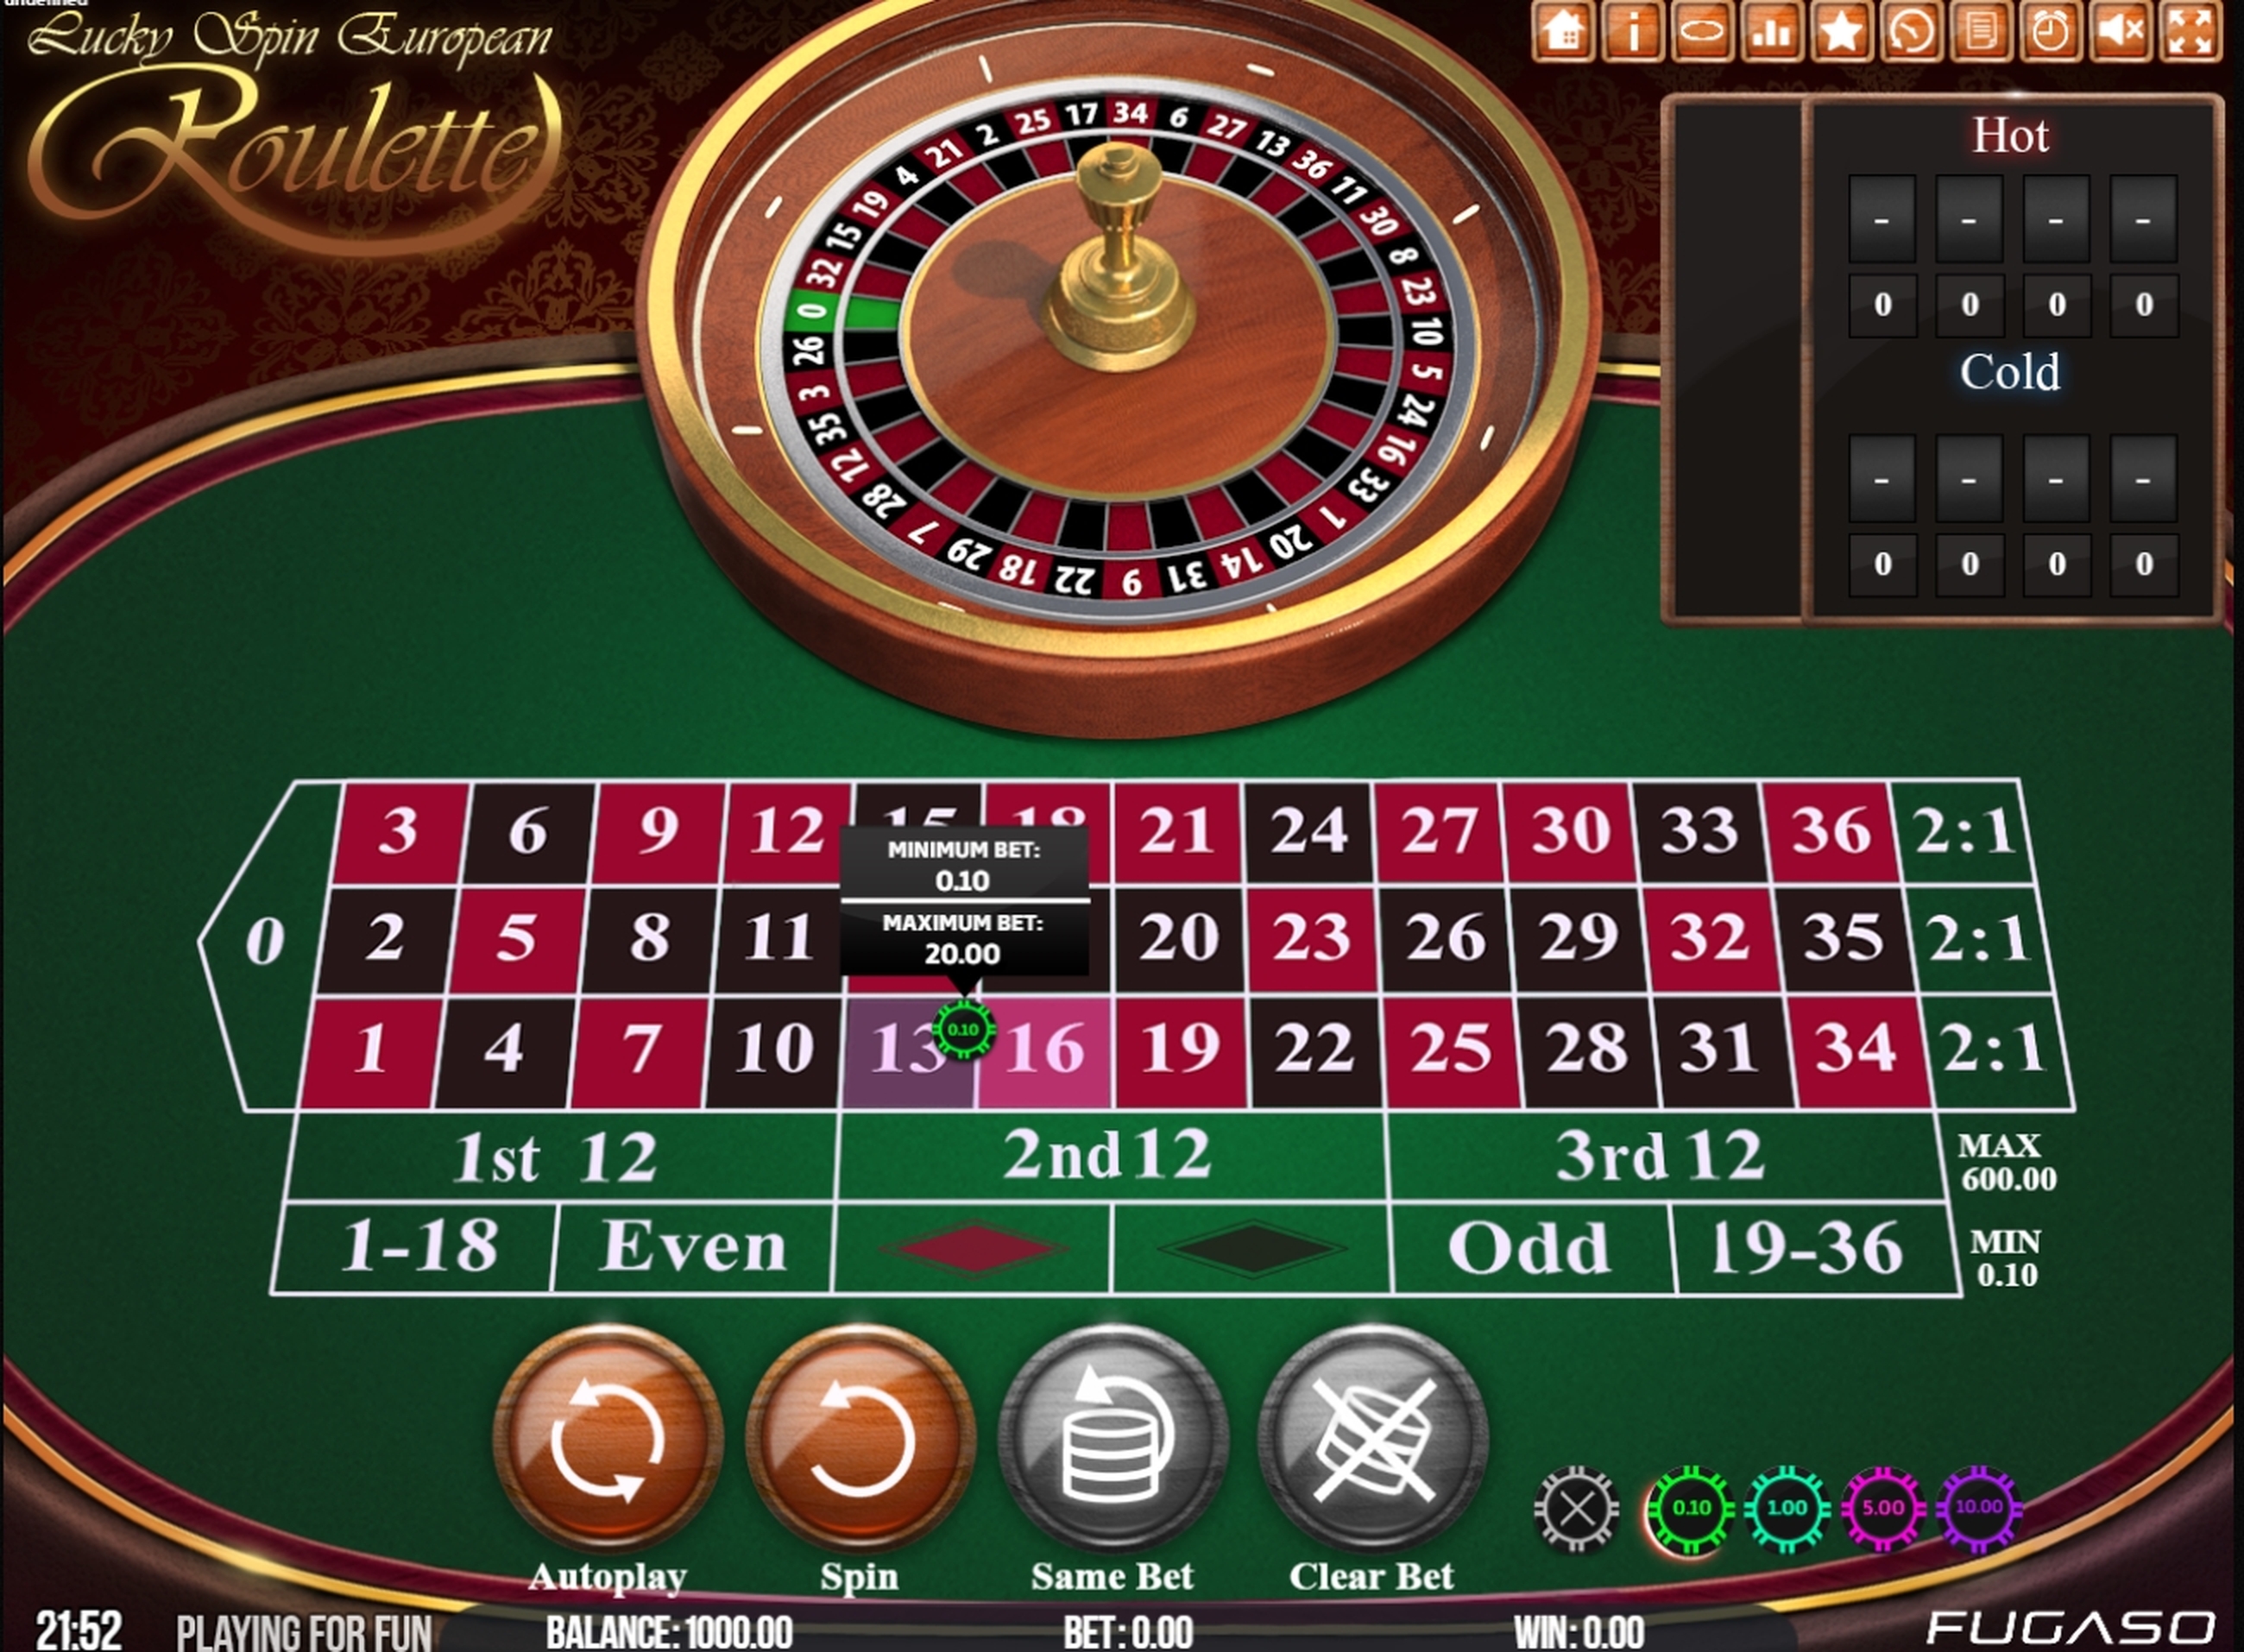 Reels in Lucky Spin European Roulette Slot Game by Fugaso